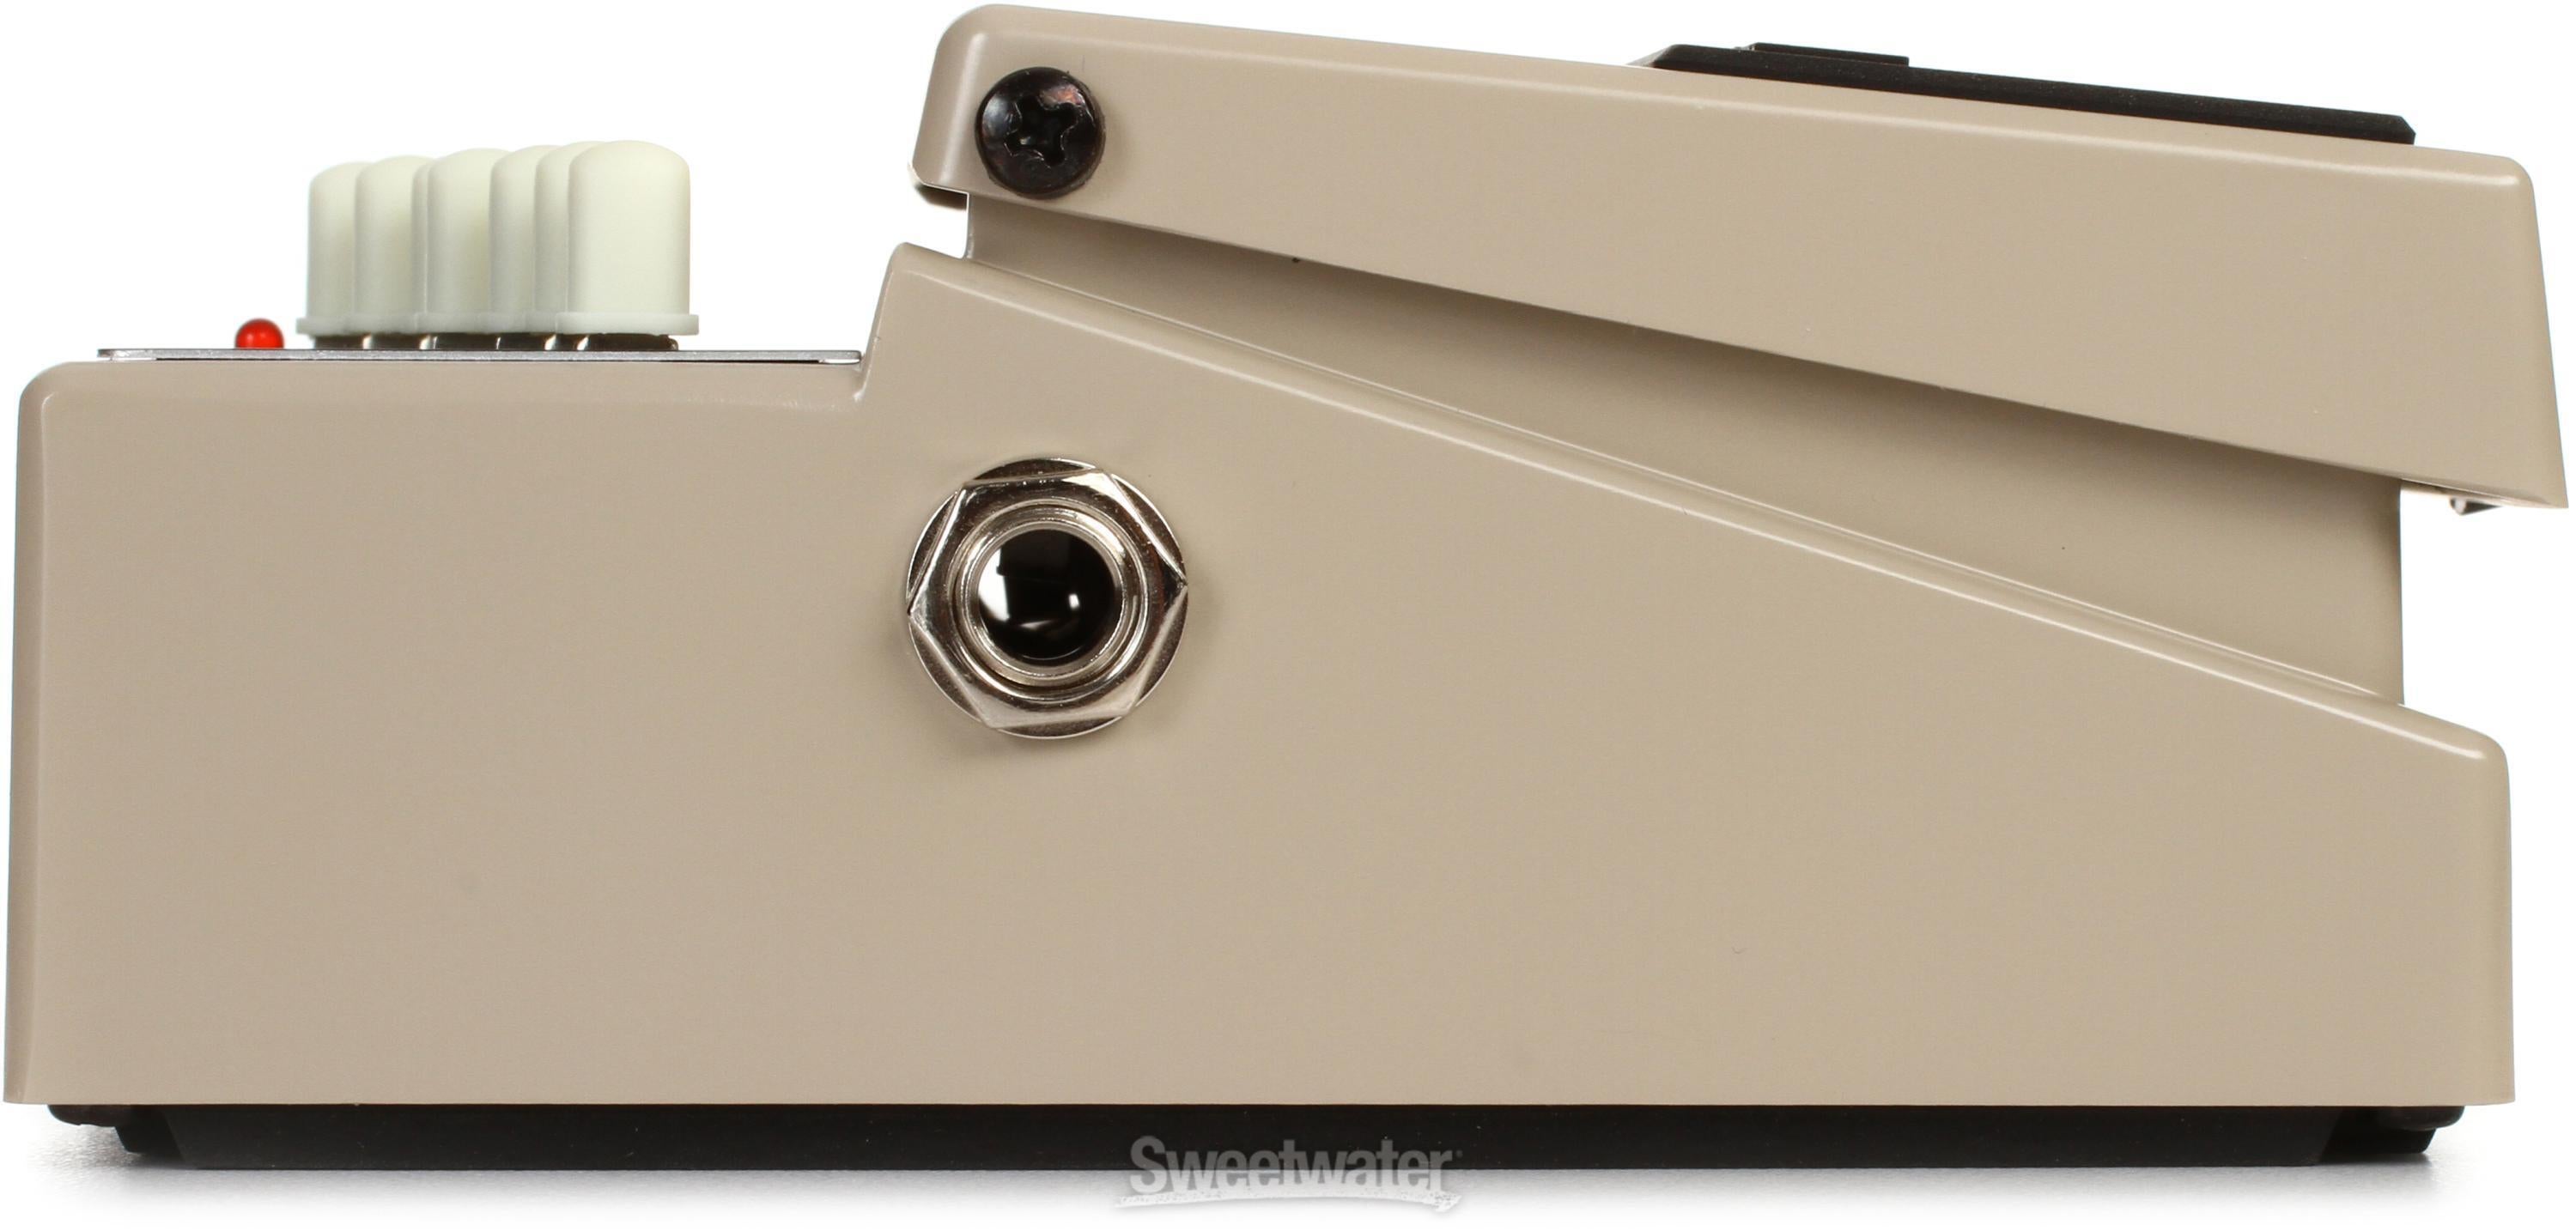 Boss GE-7 7-band EQ Pedal | Sweetwater